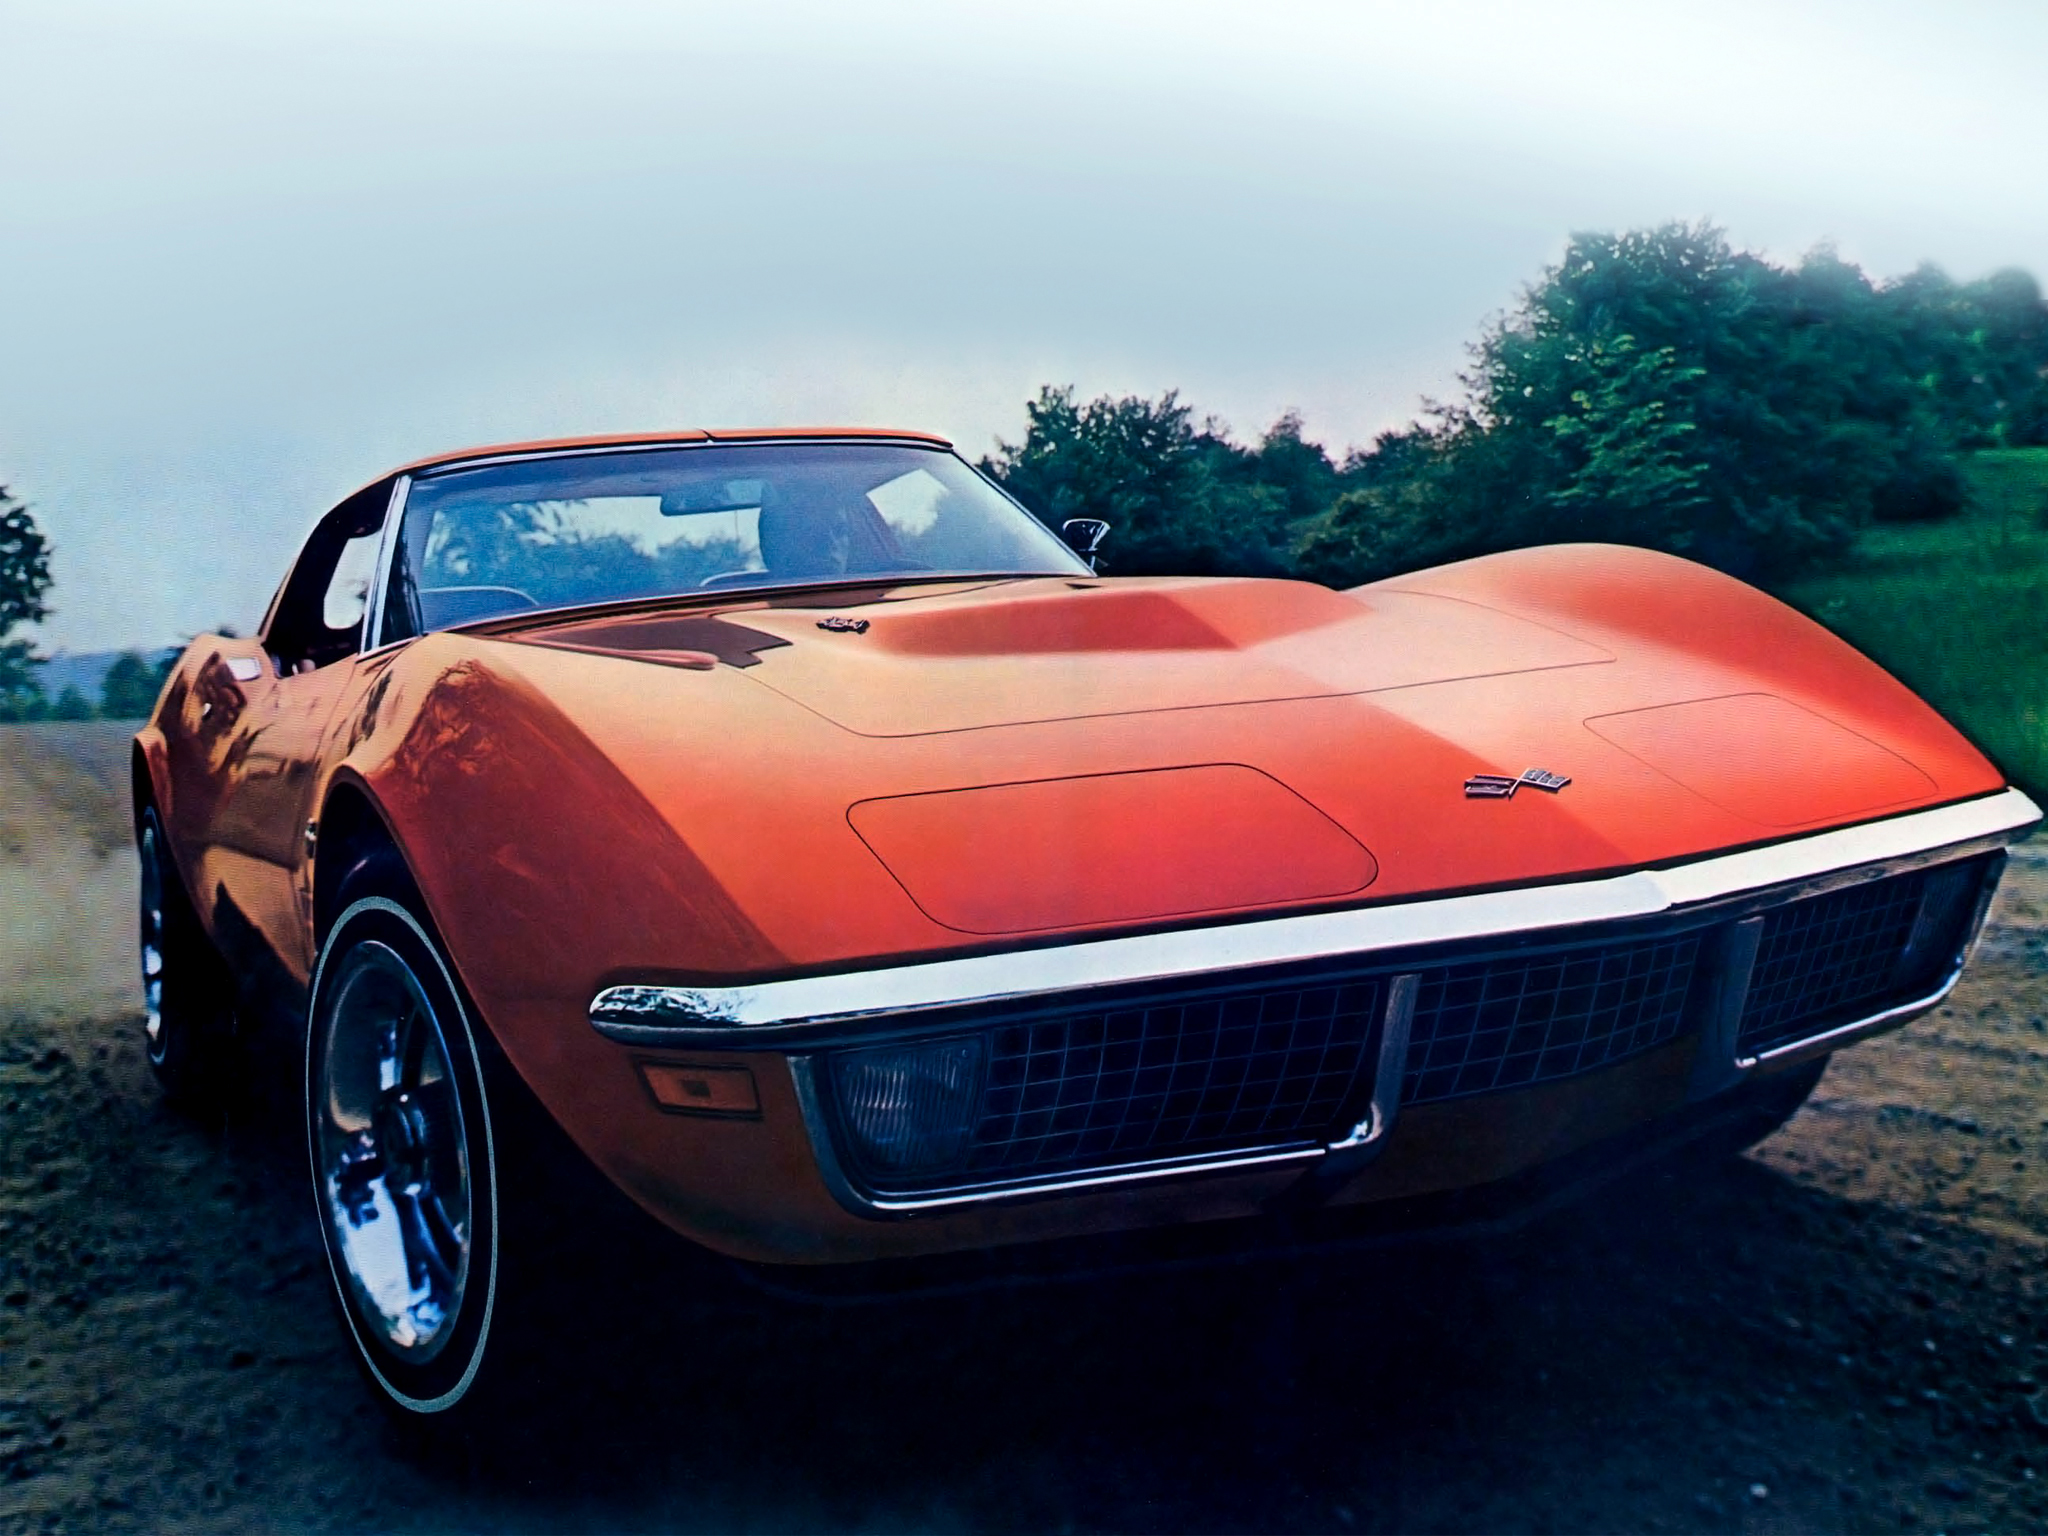 1971 Chevrolet Corvette Stingray 454 C3 Supercar Muscle Classic Wallpapers Hd Desktop And Mobile Backgrounds